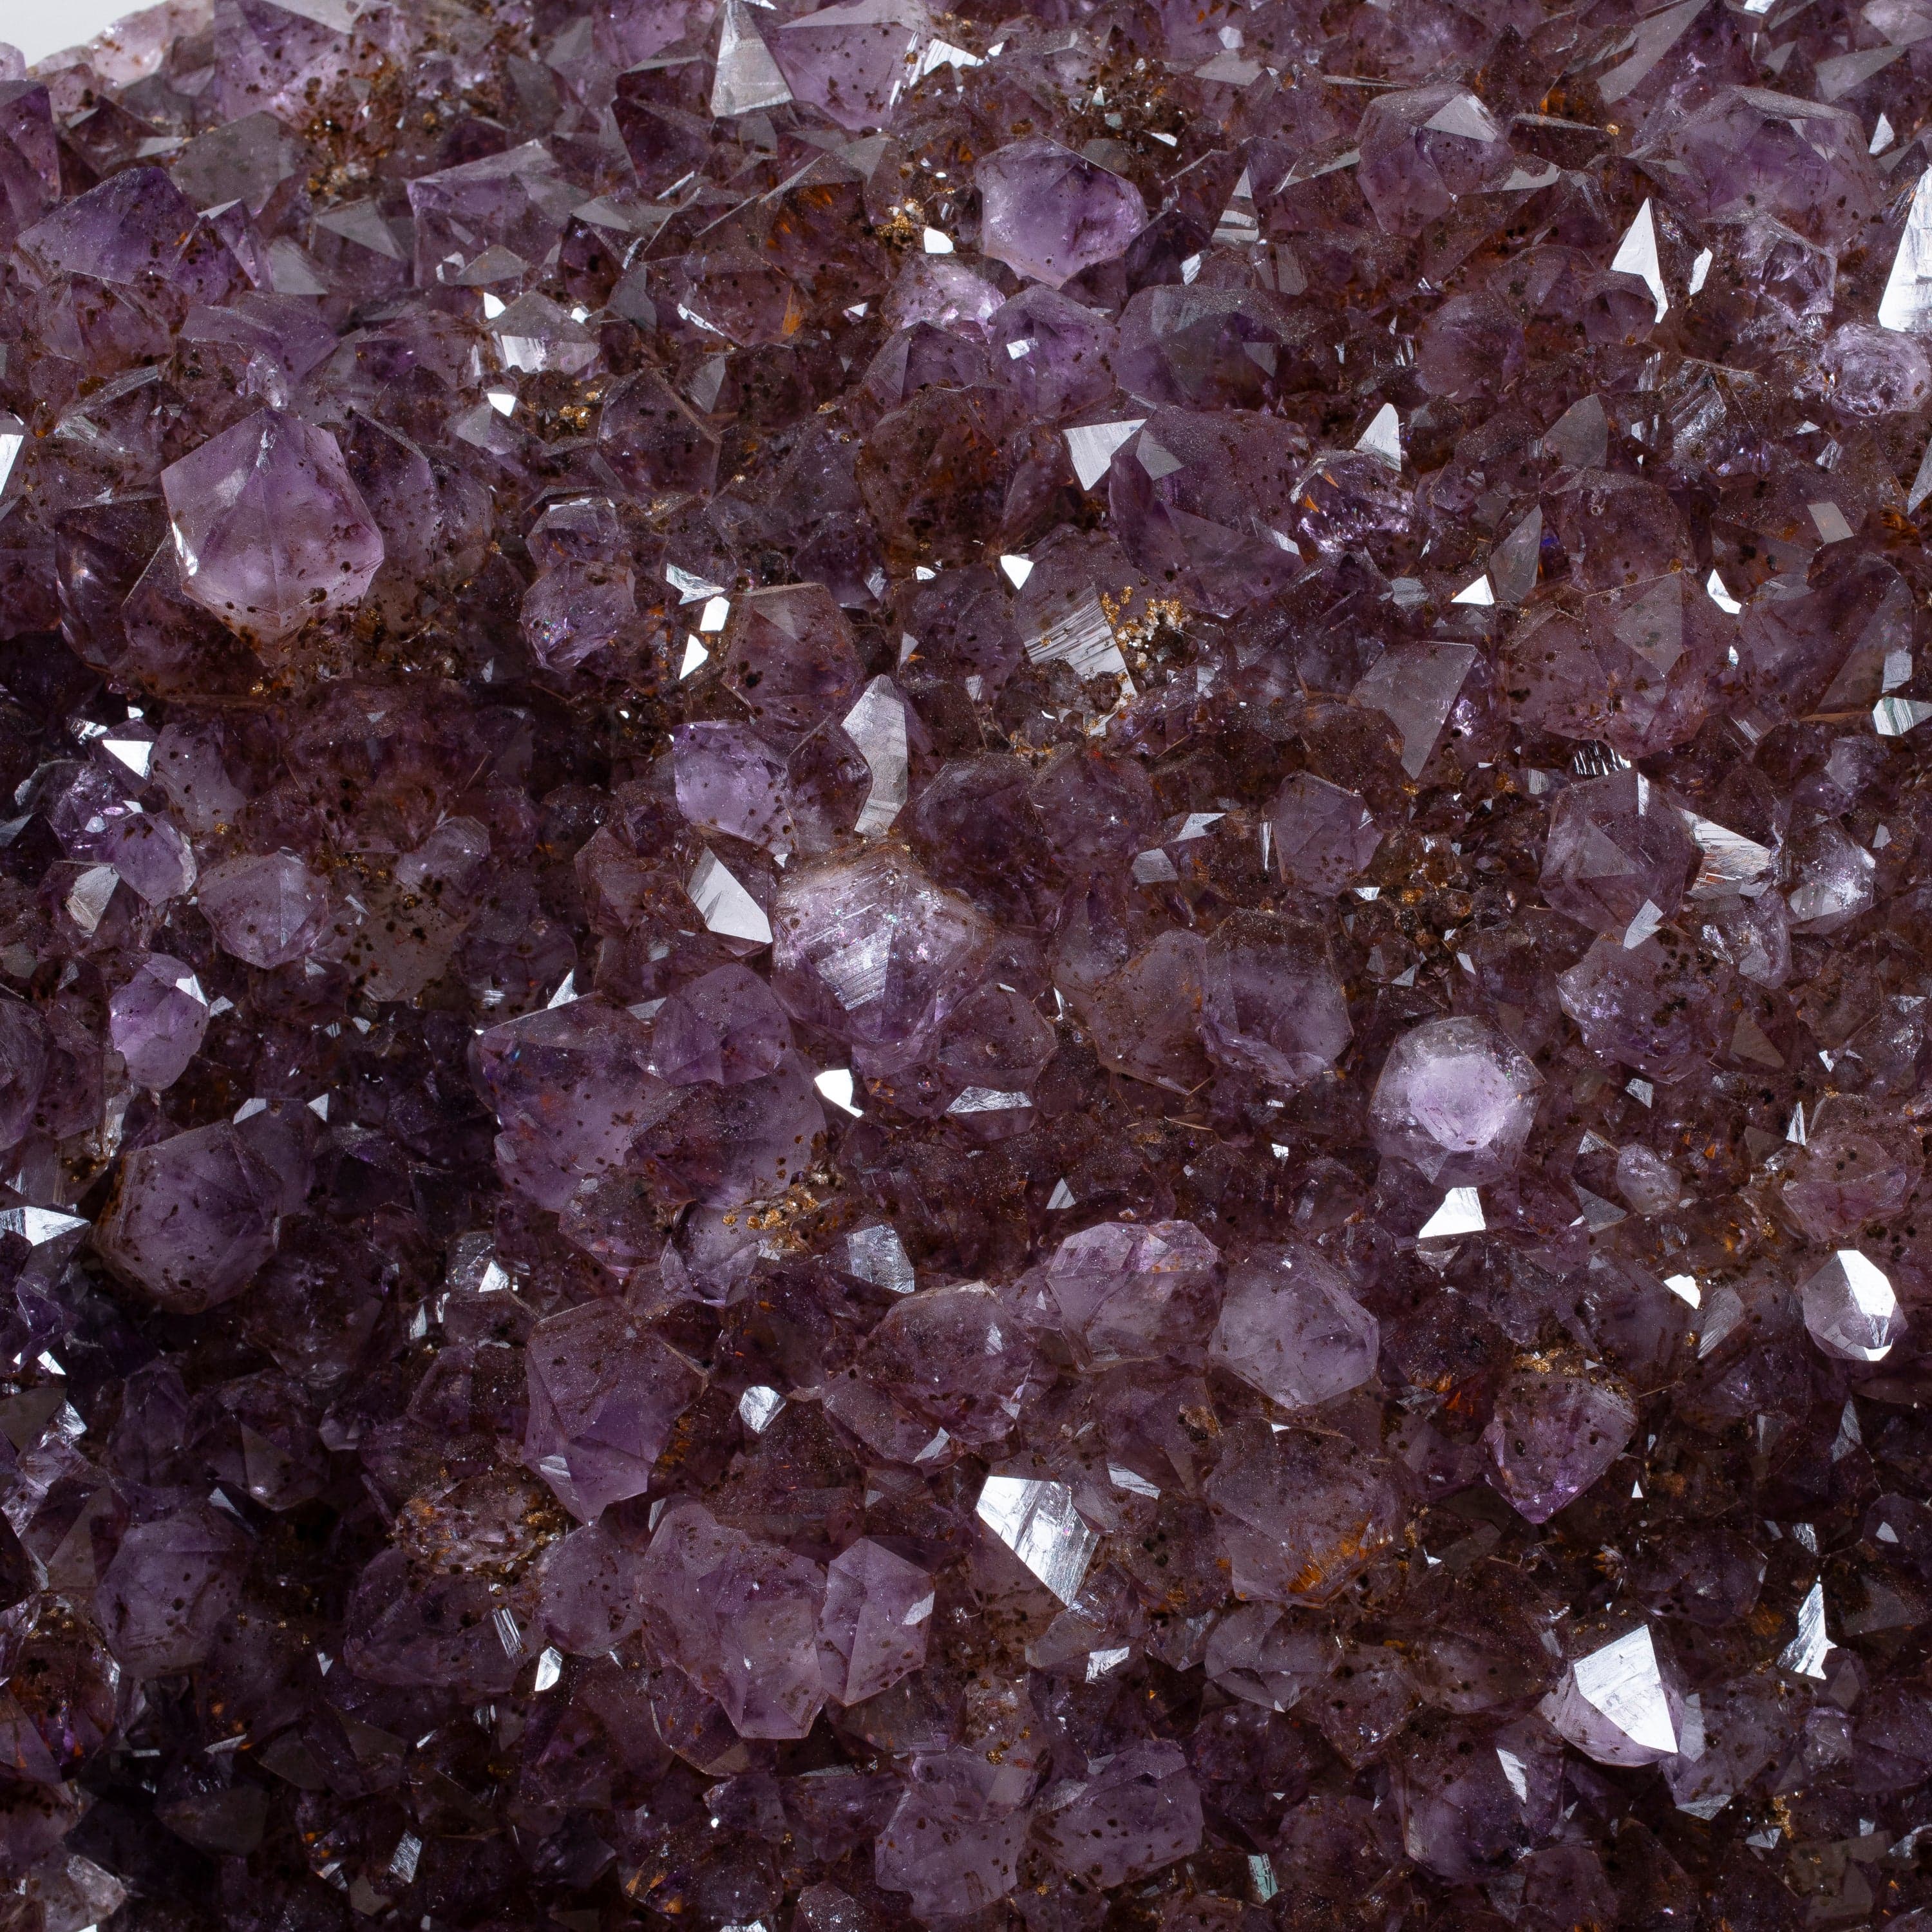 Kalifano Amethyst Amethyst Geode from Brazil on Custom Stand- 25" / 49 lbs BAG7000.006